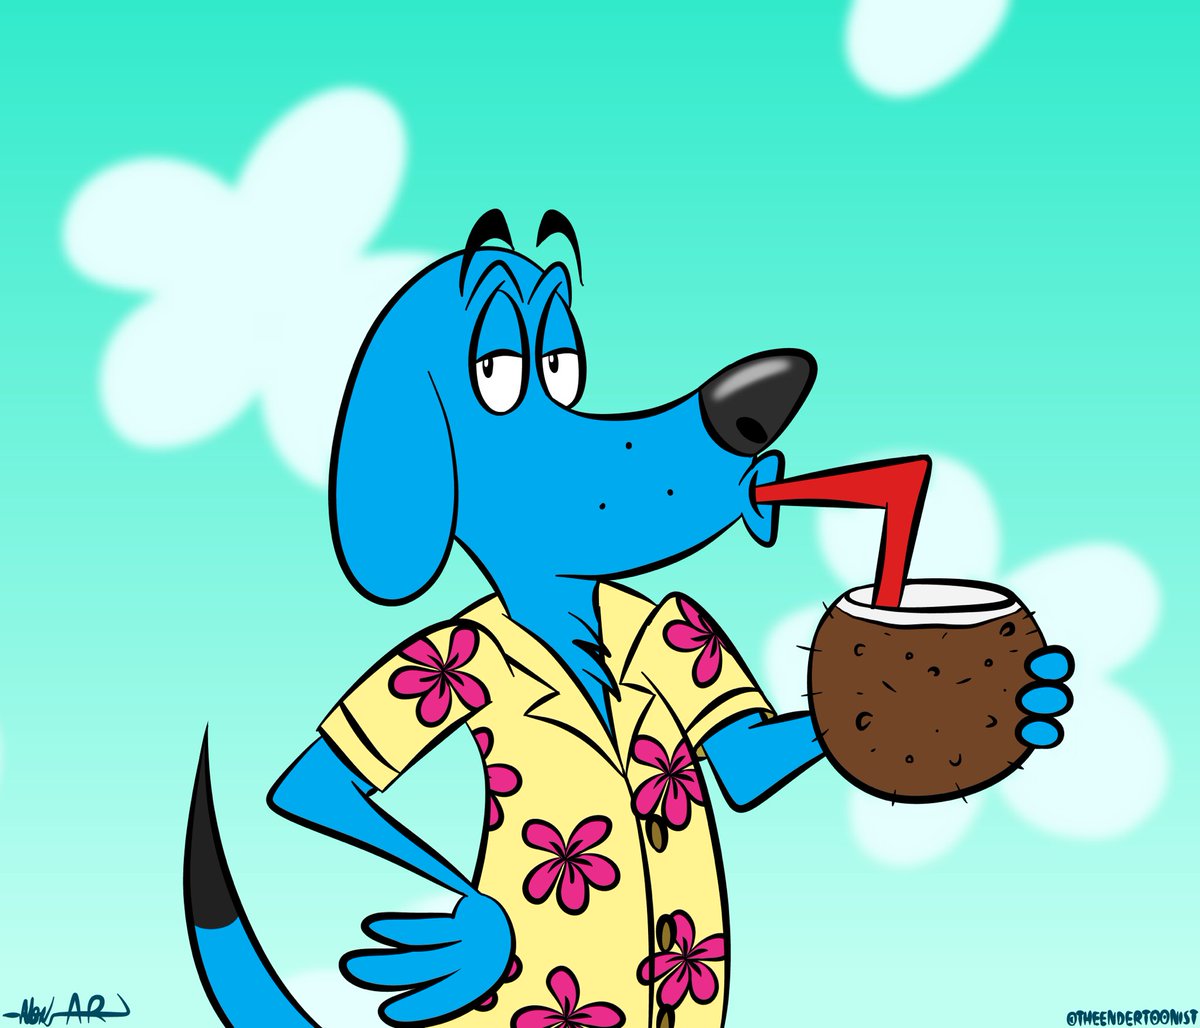 Point Commission - Donny In A Hawaiian Shirt

#cartooncharacter #cartoon #dog #donny #hawaiianshirt #coconut #drinking #sipping #summer #pointcommission #commission #deviantart #digital